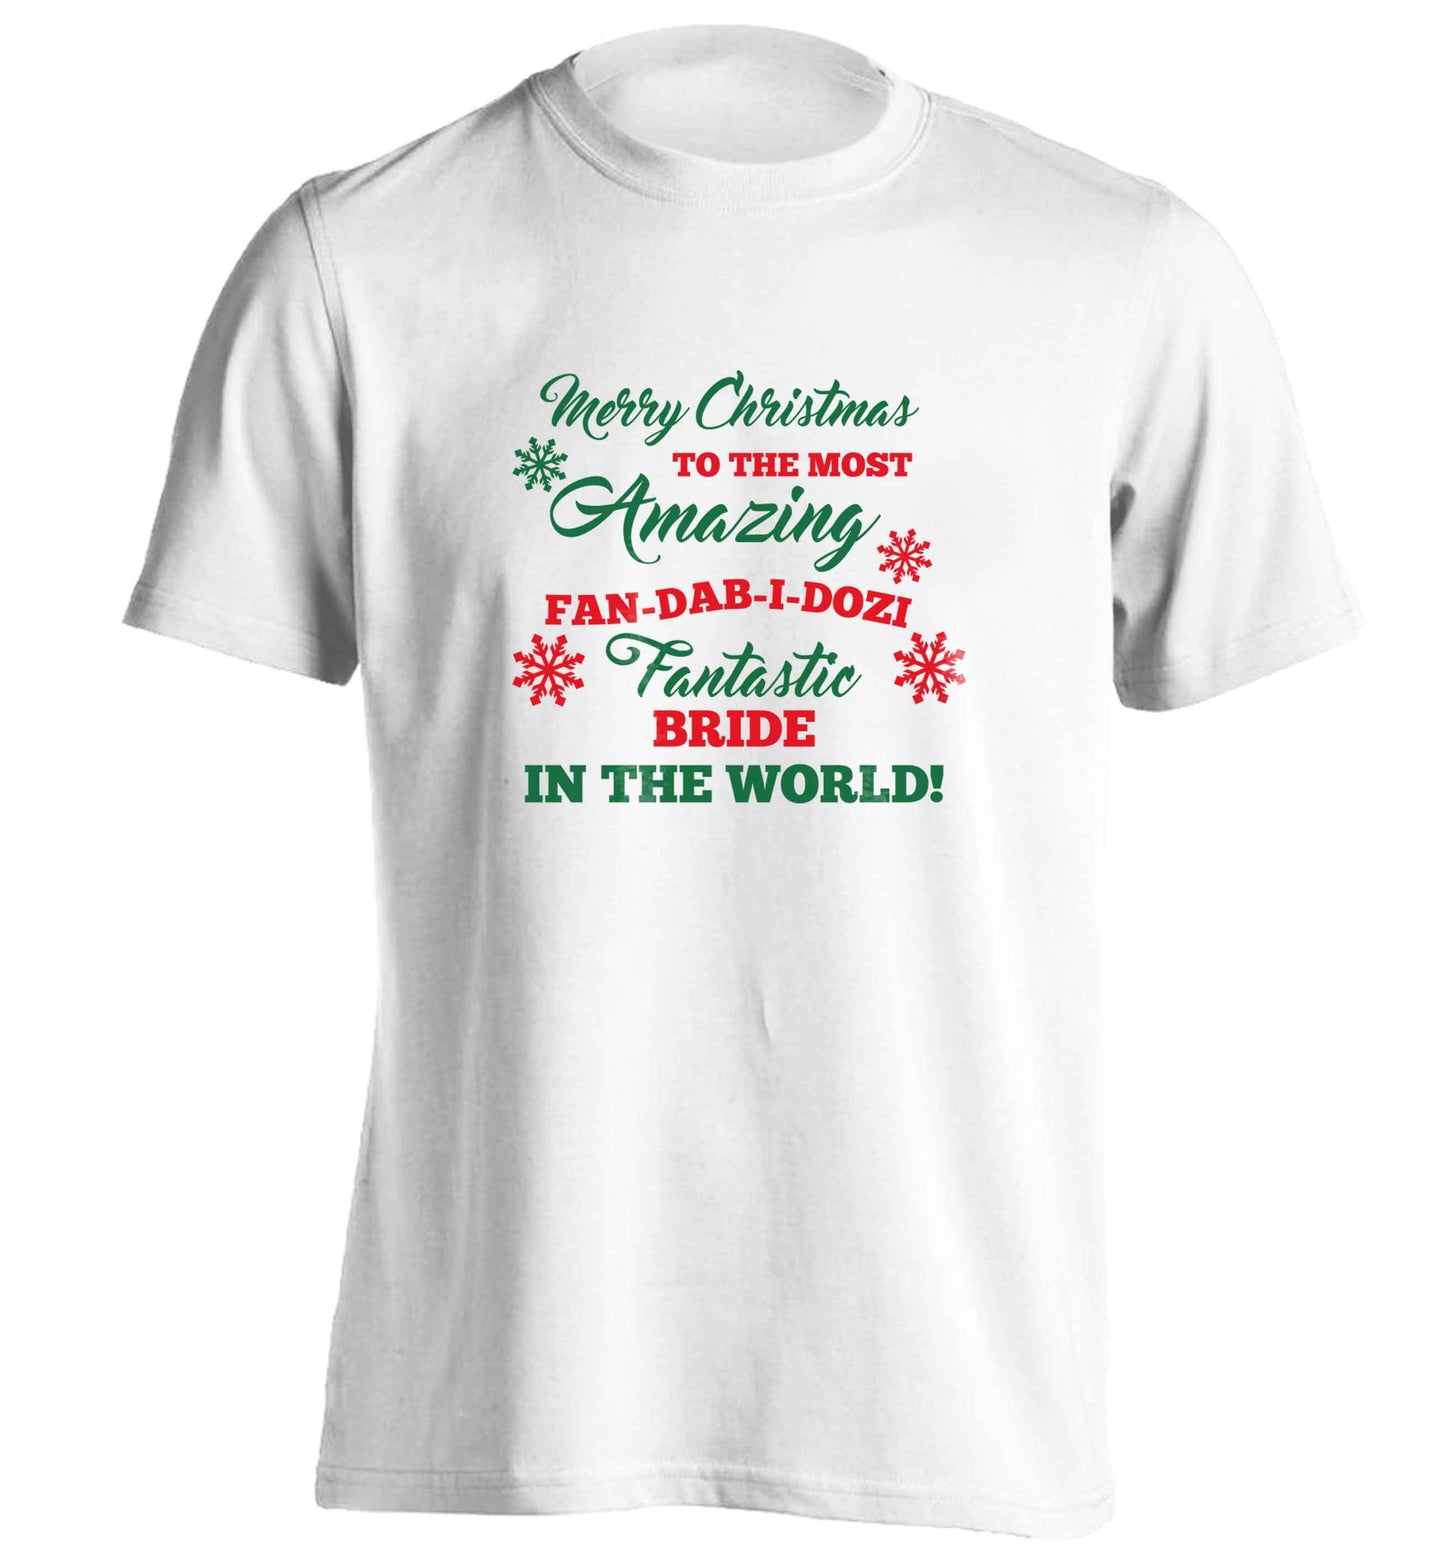 Merry Christmas to the most amazing bride in the world! adults unisex white Tshirt 2XL